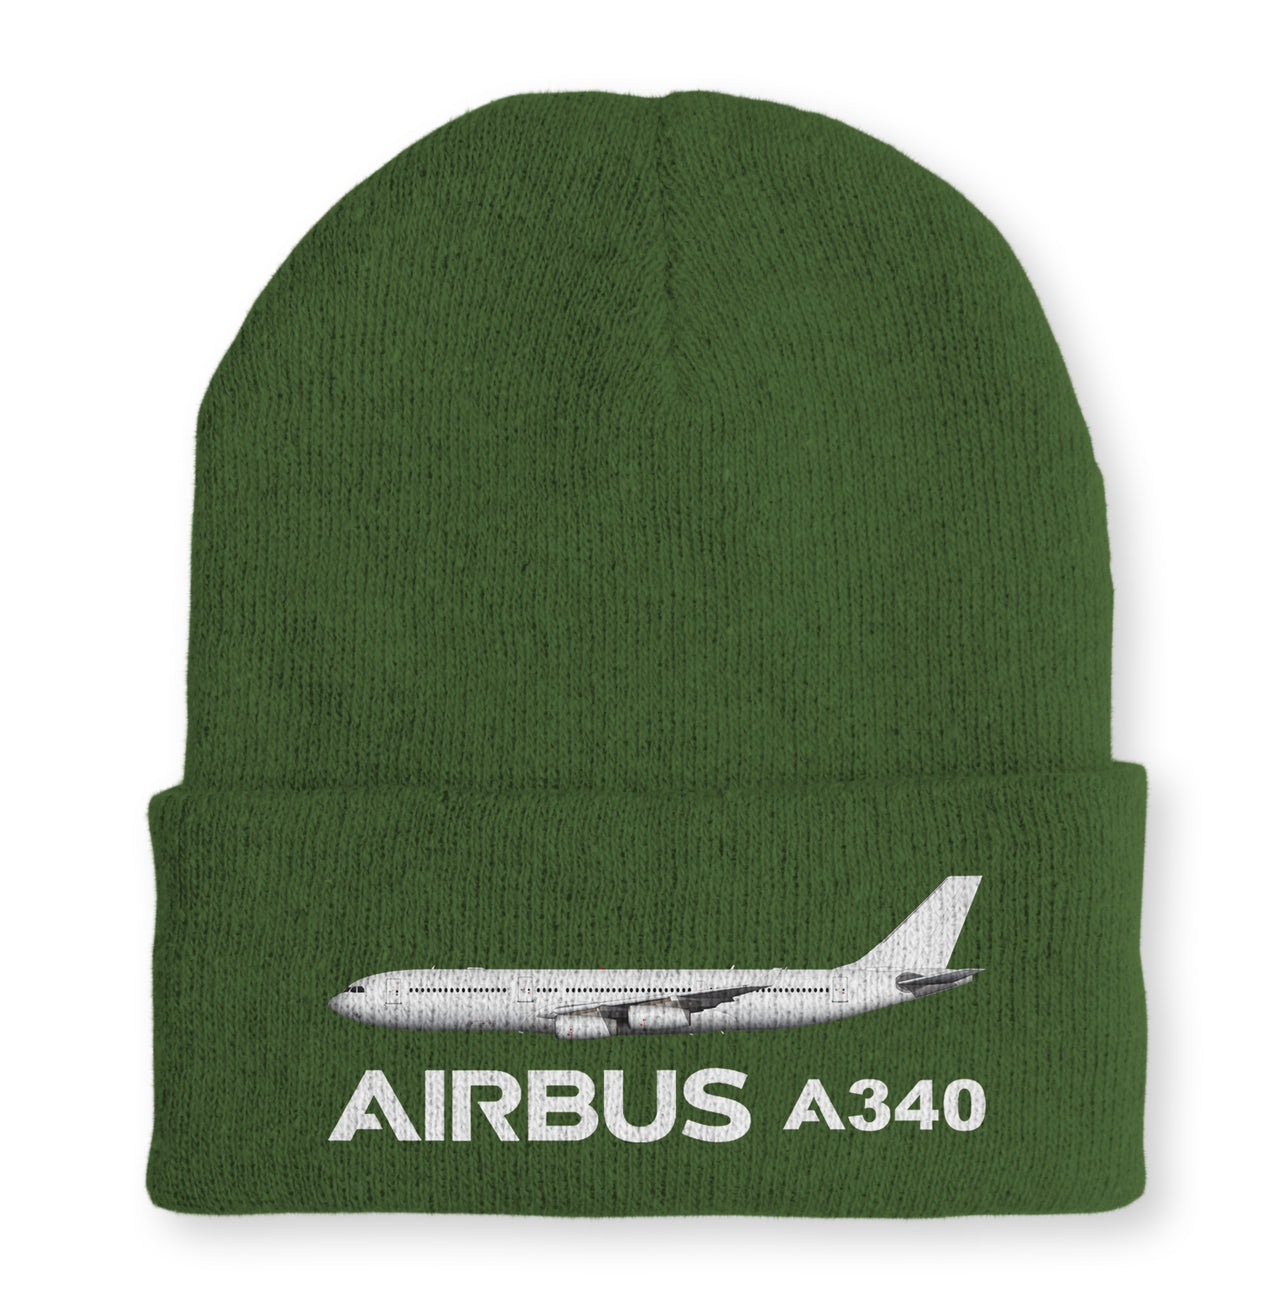 The Airbus A340 Embroidered Beanies